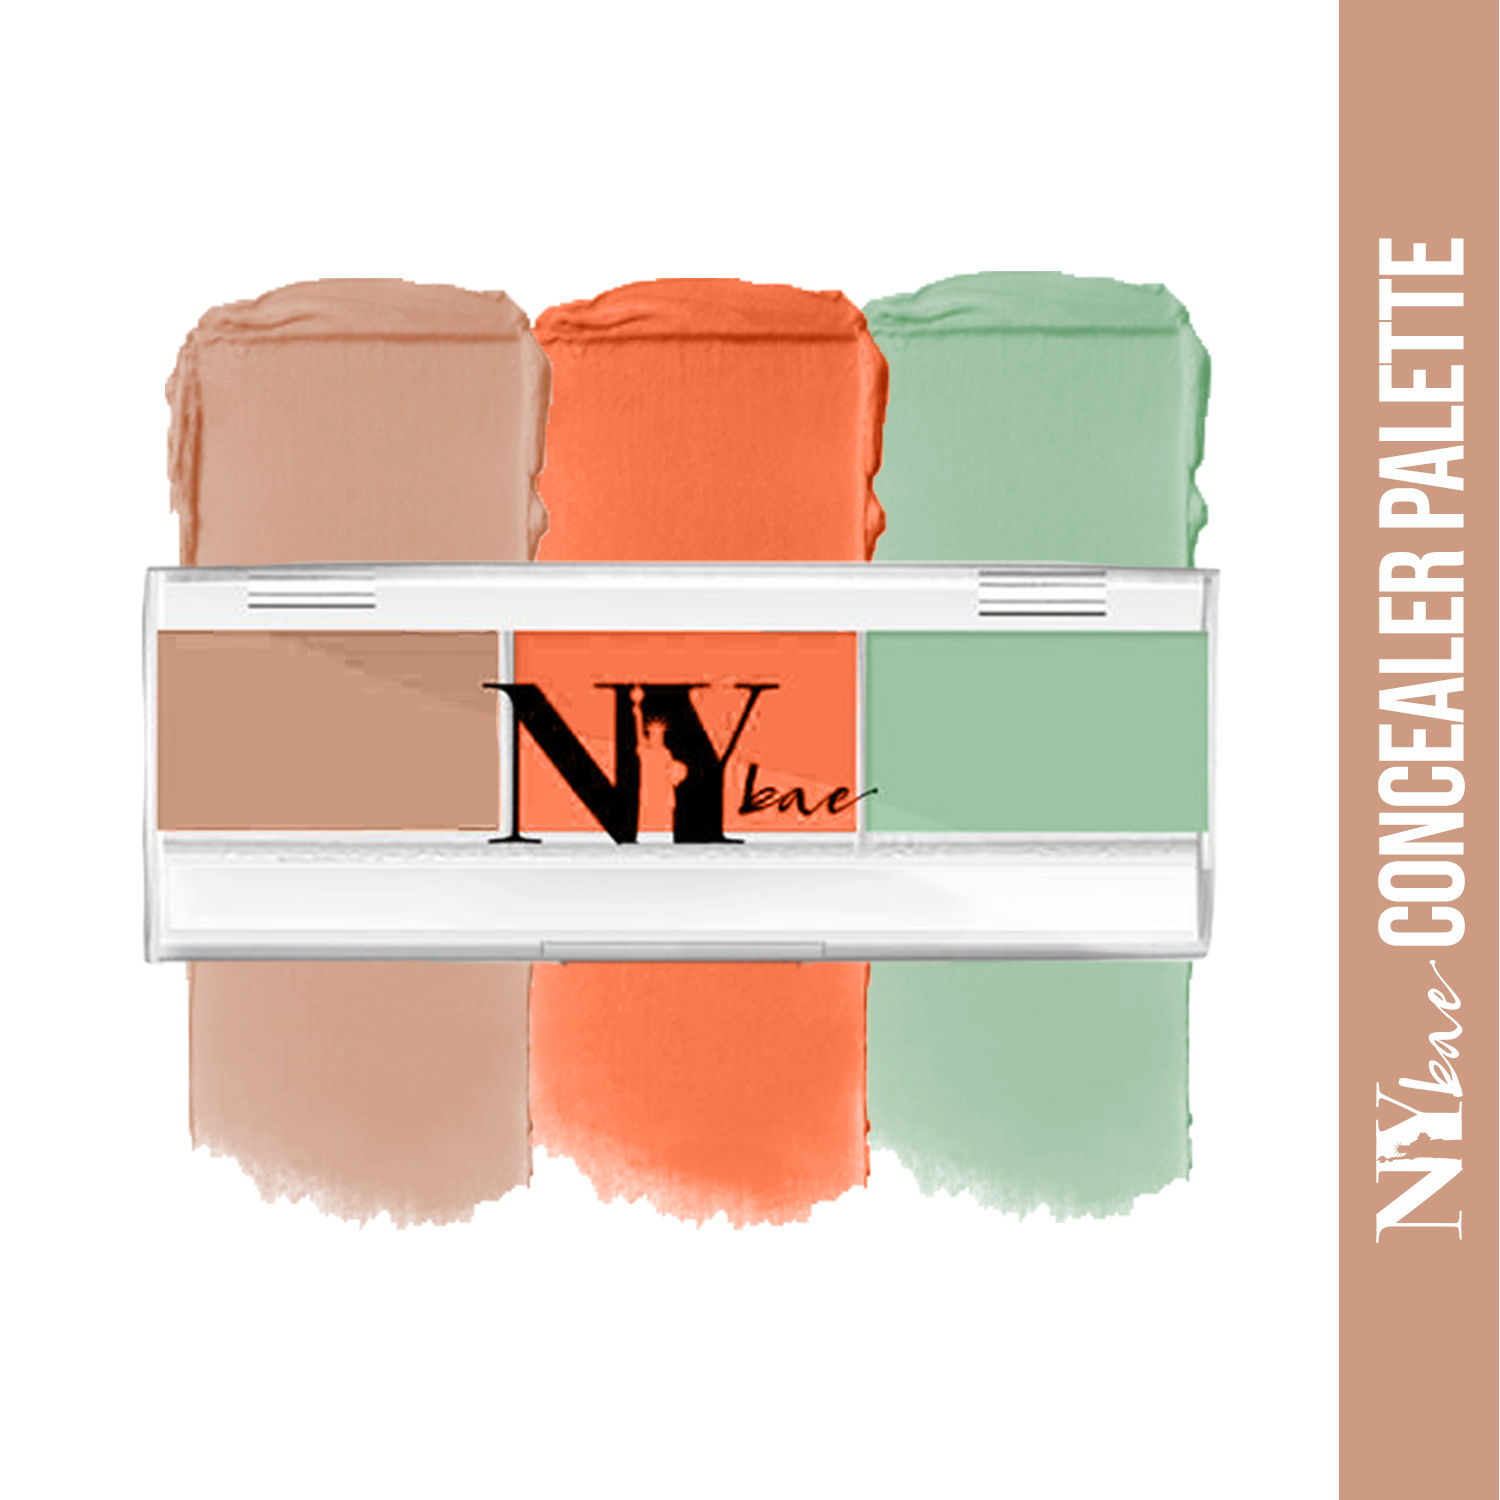 Buy NY Bae Concealer Palette with Orange & Green Color Corrector, For Dusky Skin, Maskin' at Manhattan - Ivory like Empire State Building 4 (1.5 g X 3) - Purplle